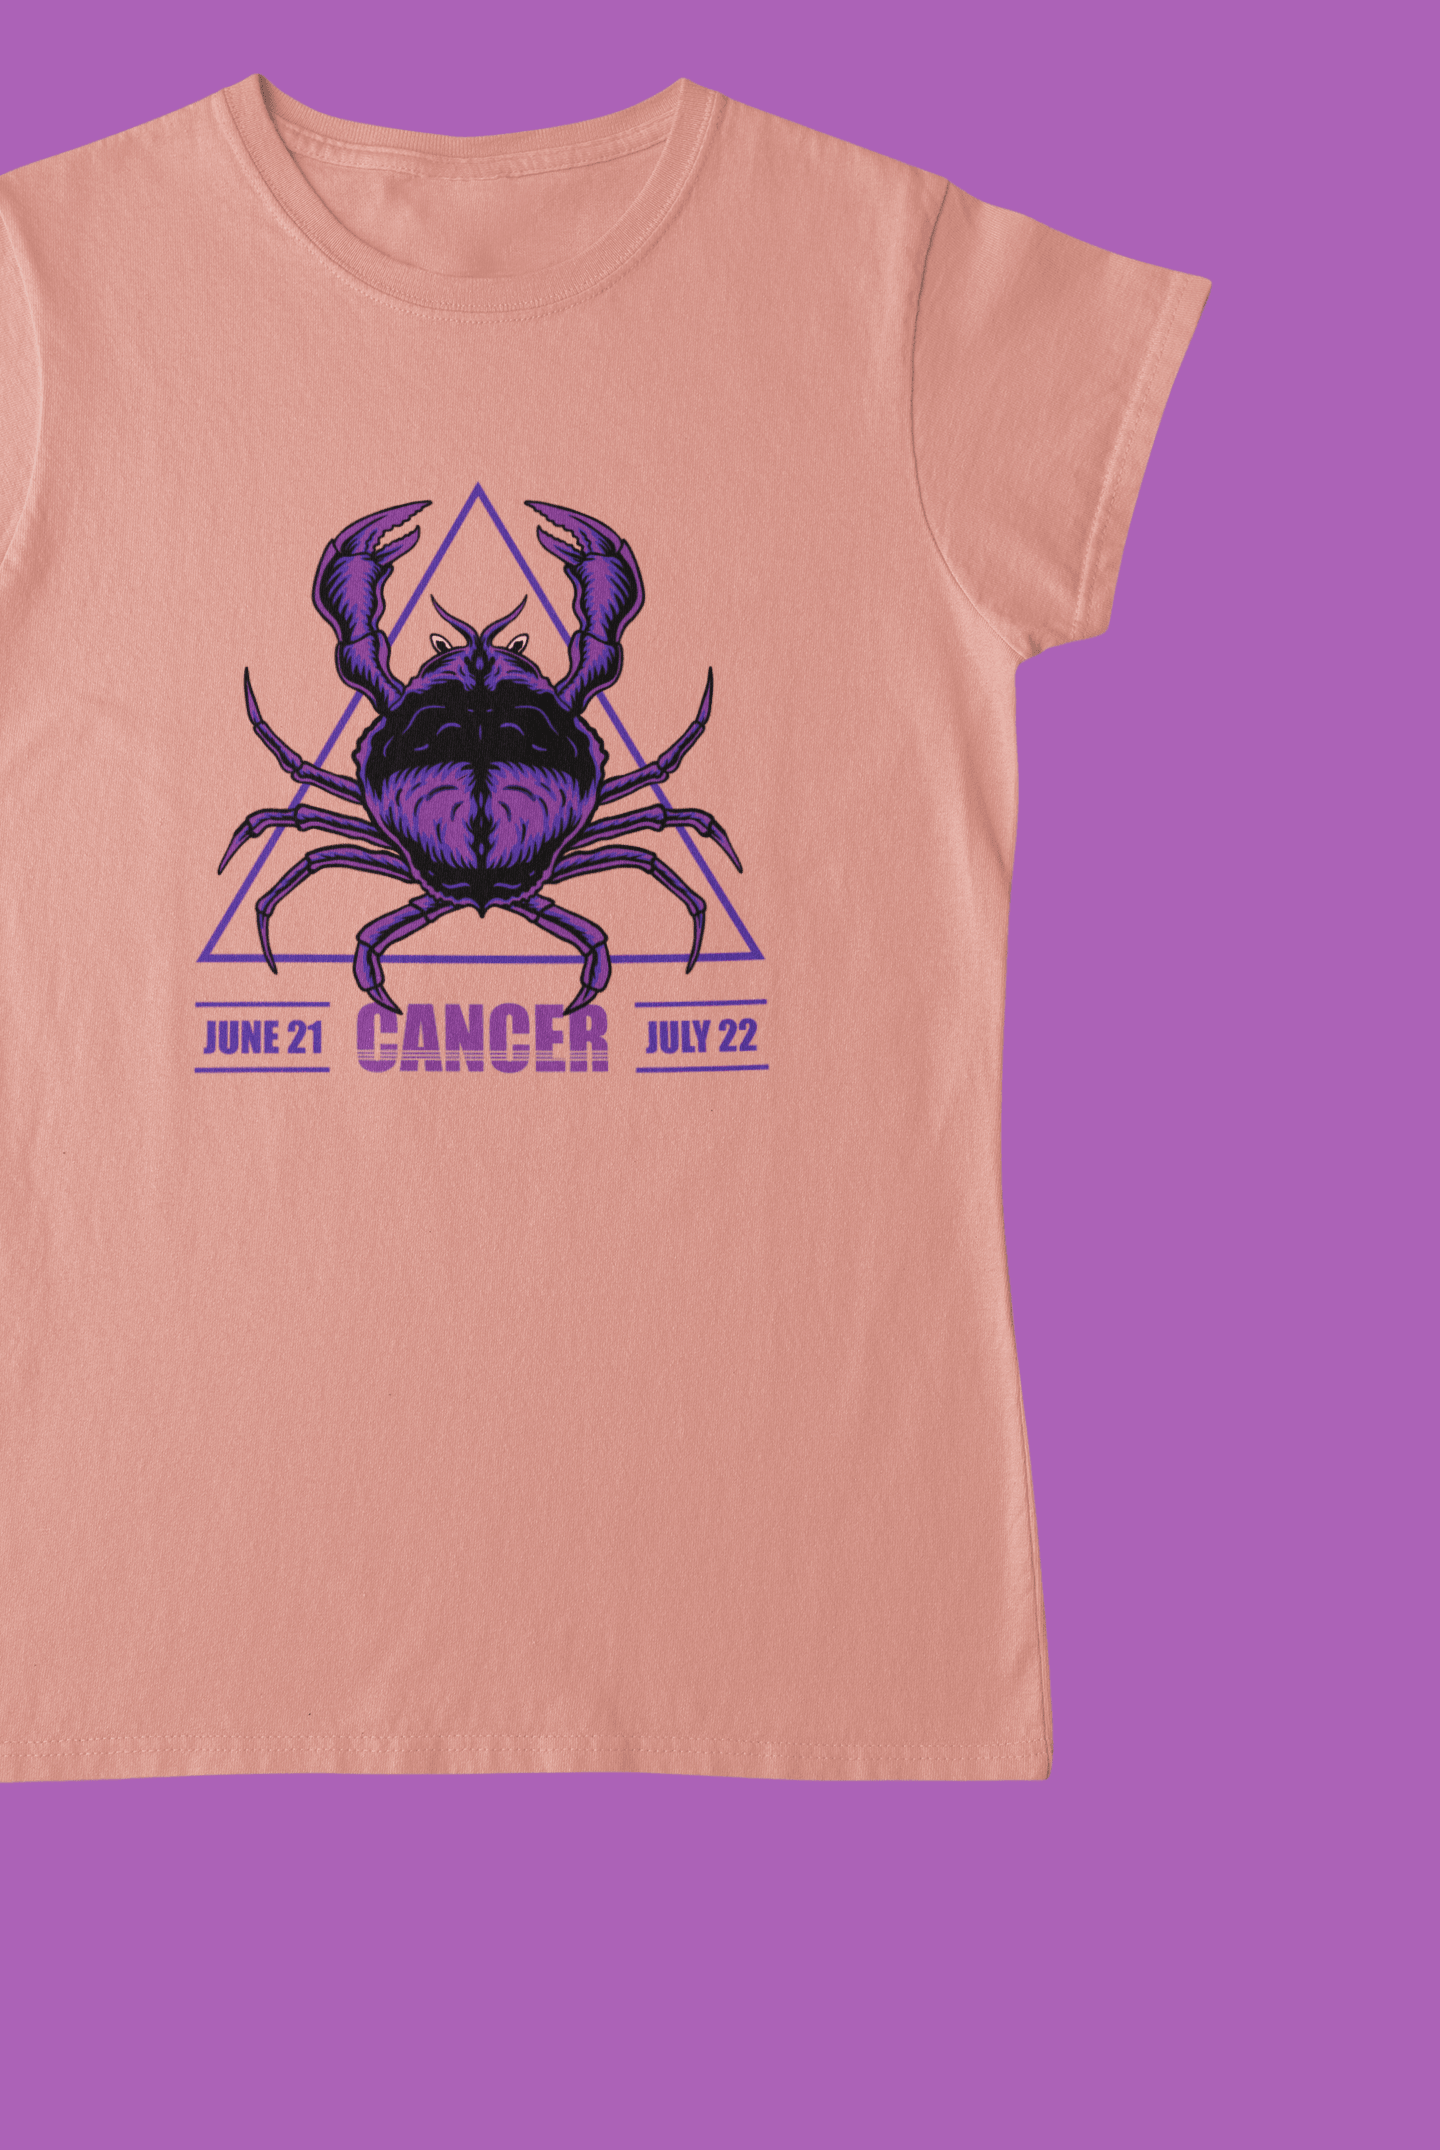 Cancer June 21 To July 22 Peach T-Shirt For Women - ATOM